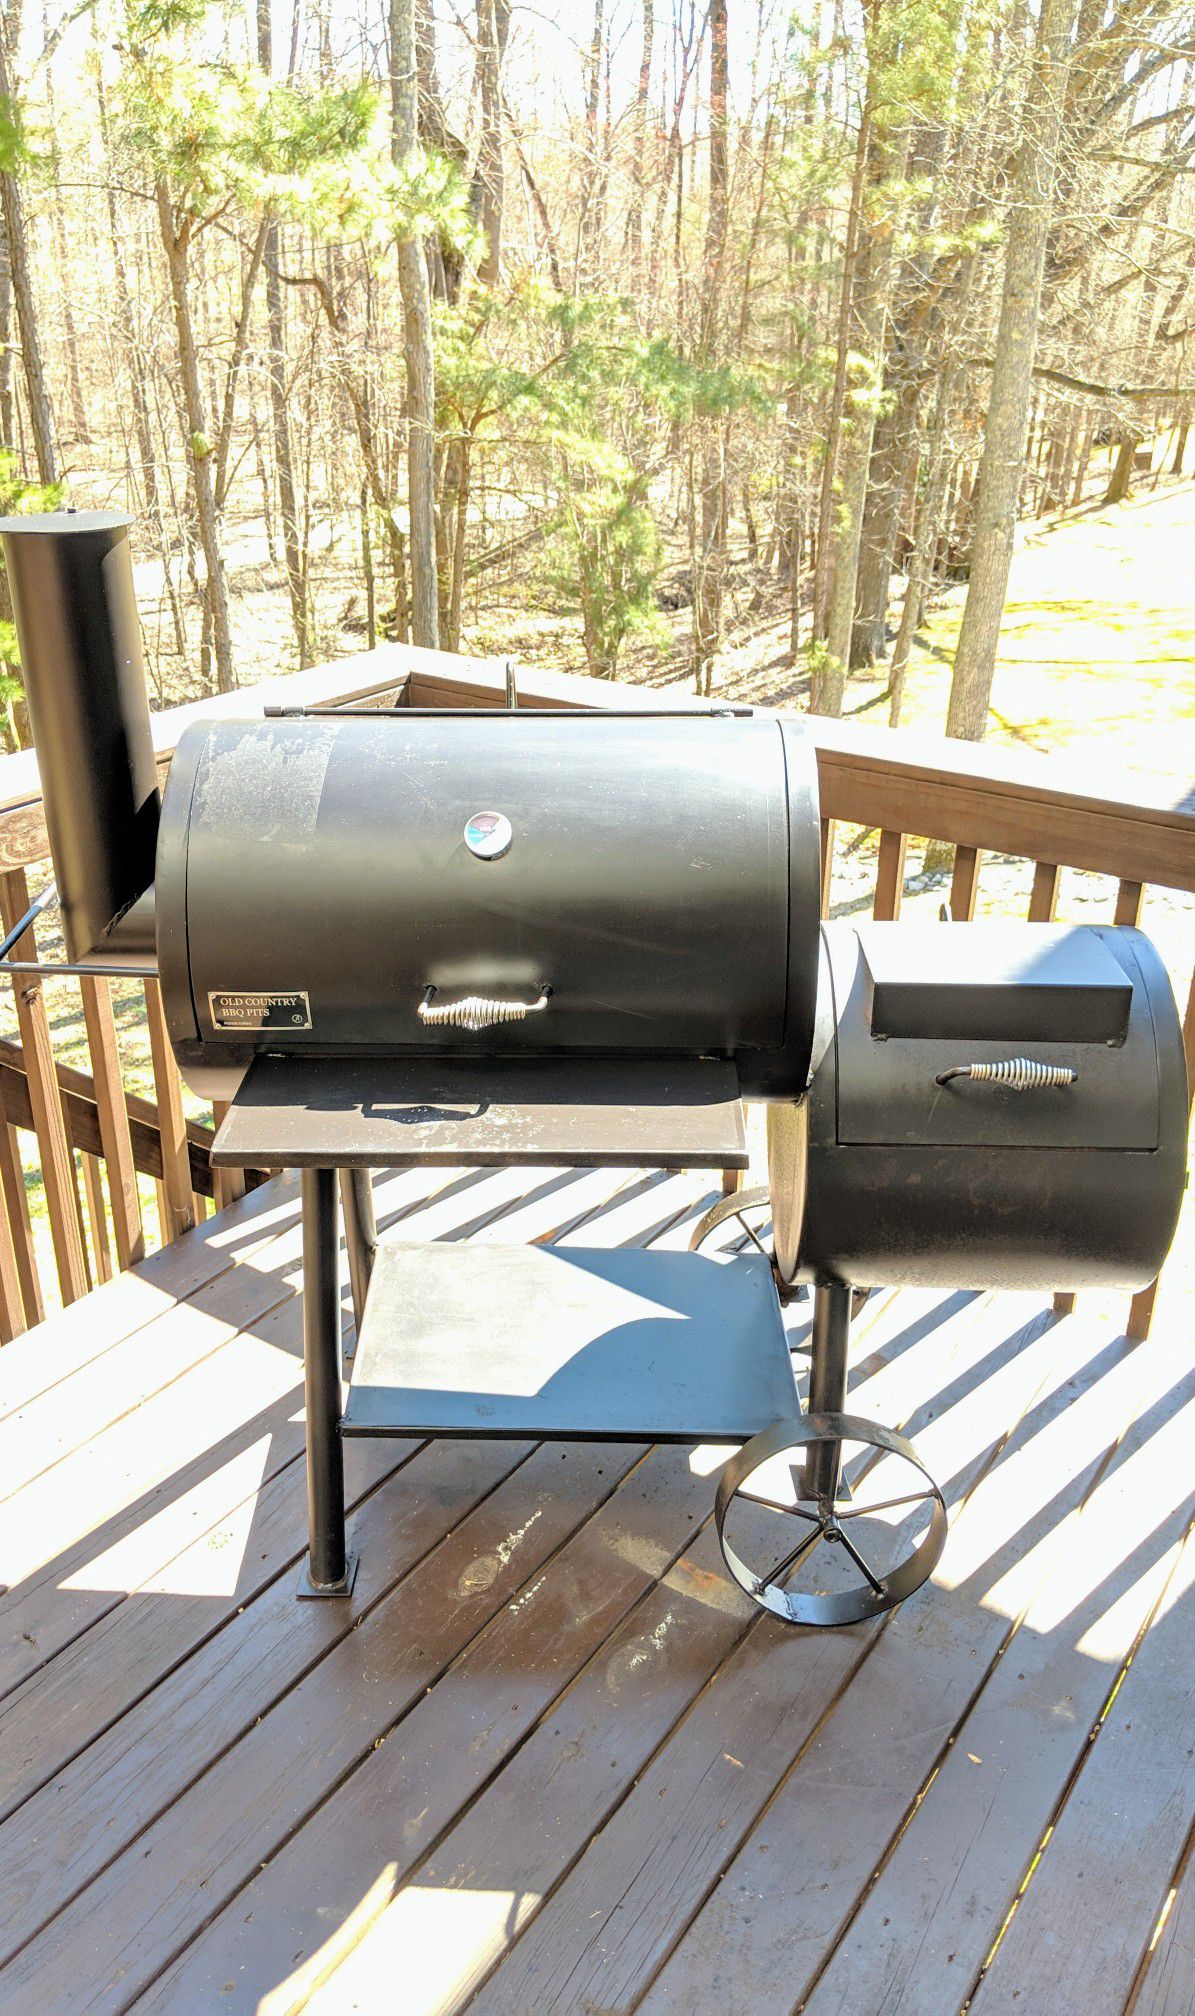 Old Country BBQ Pits Wrangler Smoker Grill - handcrafted smoker made with heavy duty steel... lifetime warranty! Excellent condition!